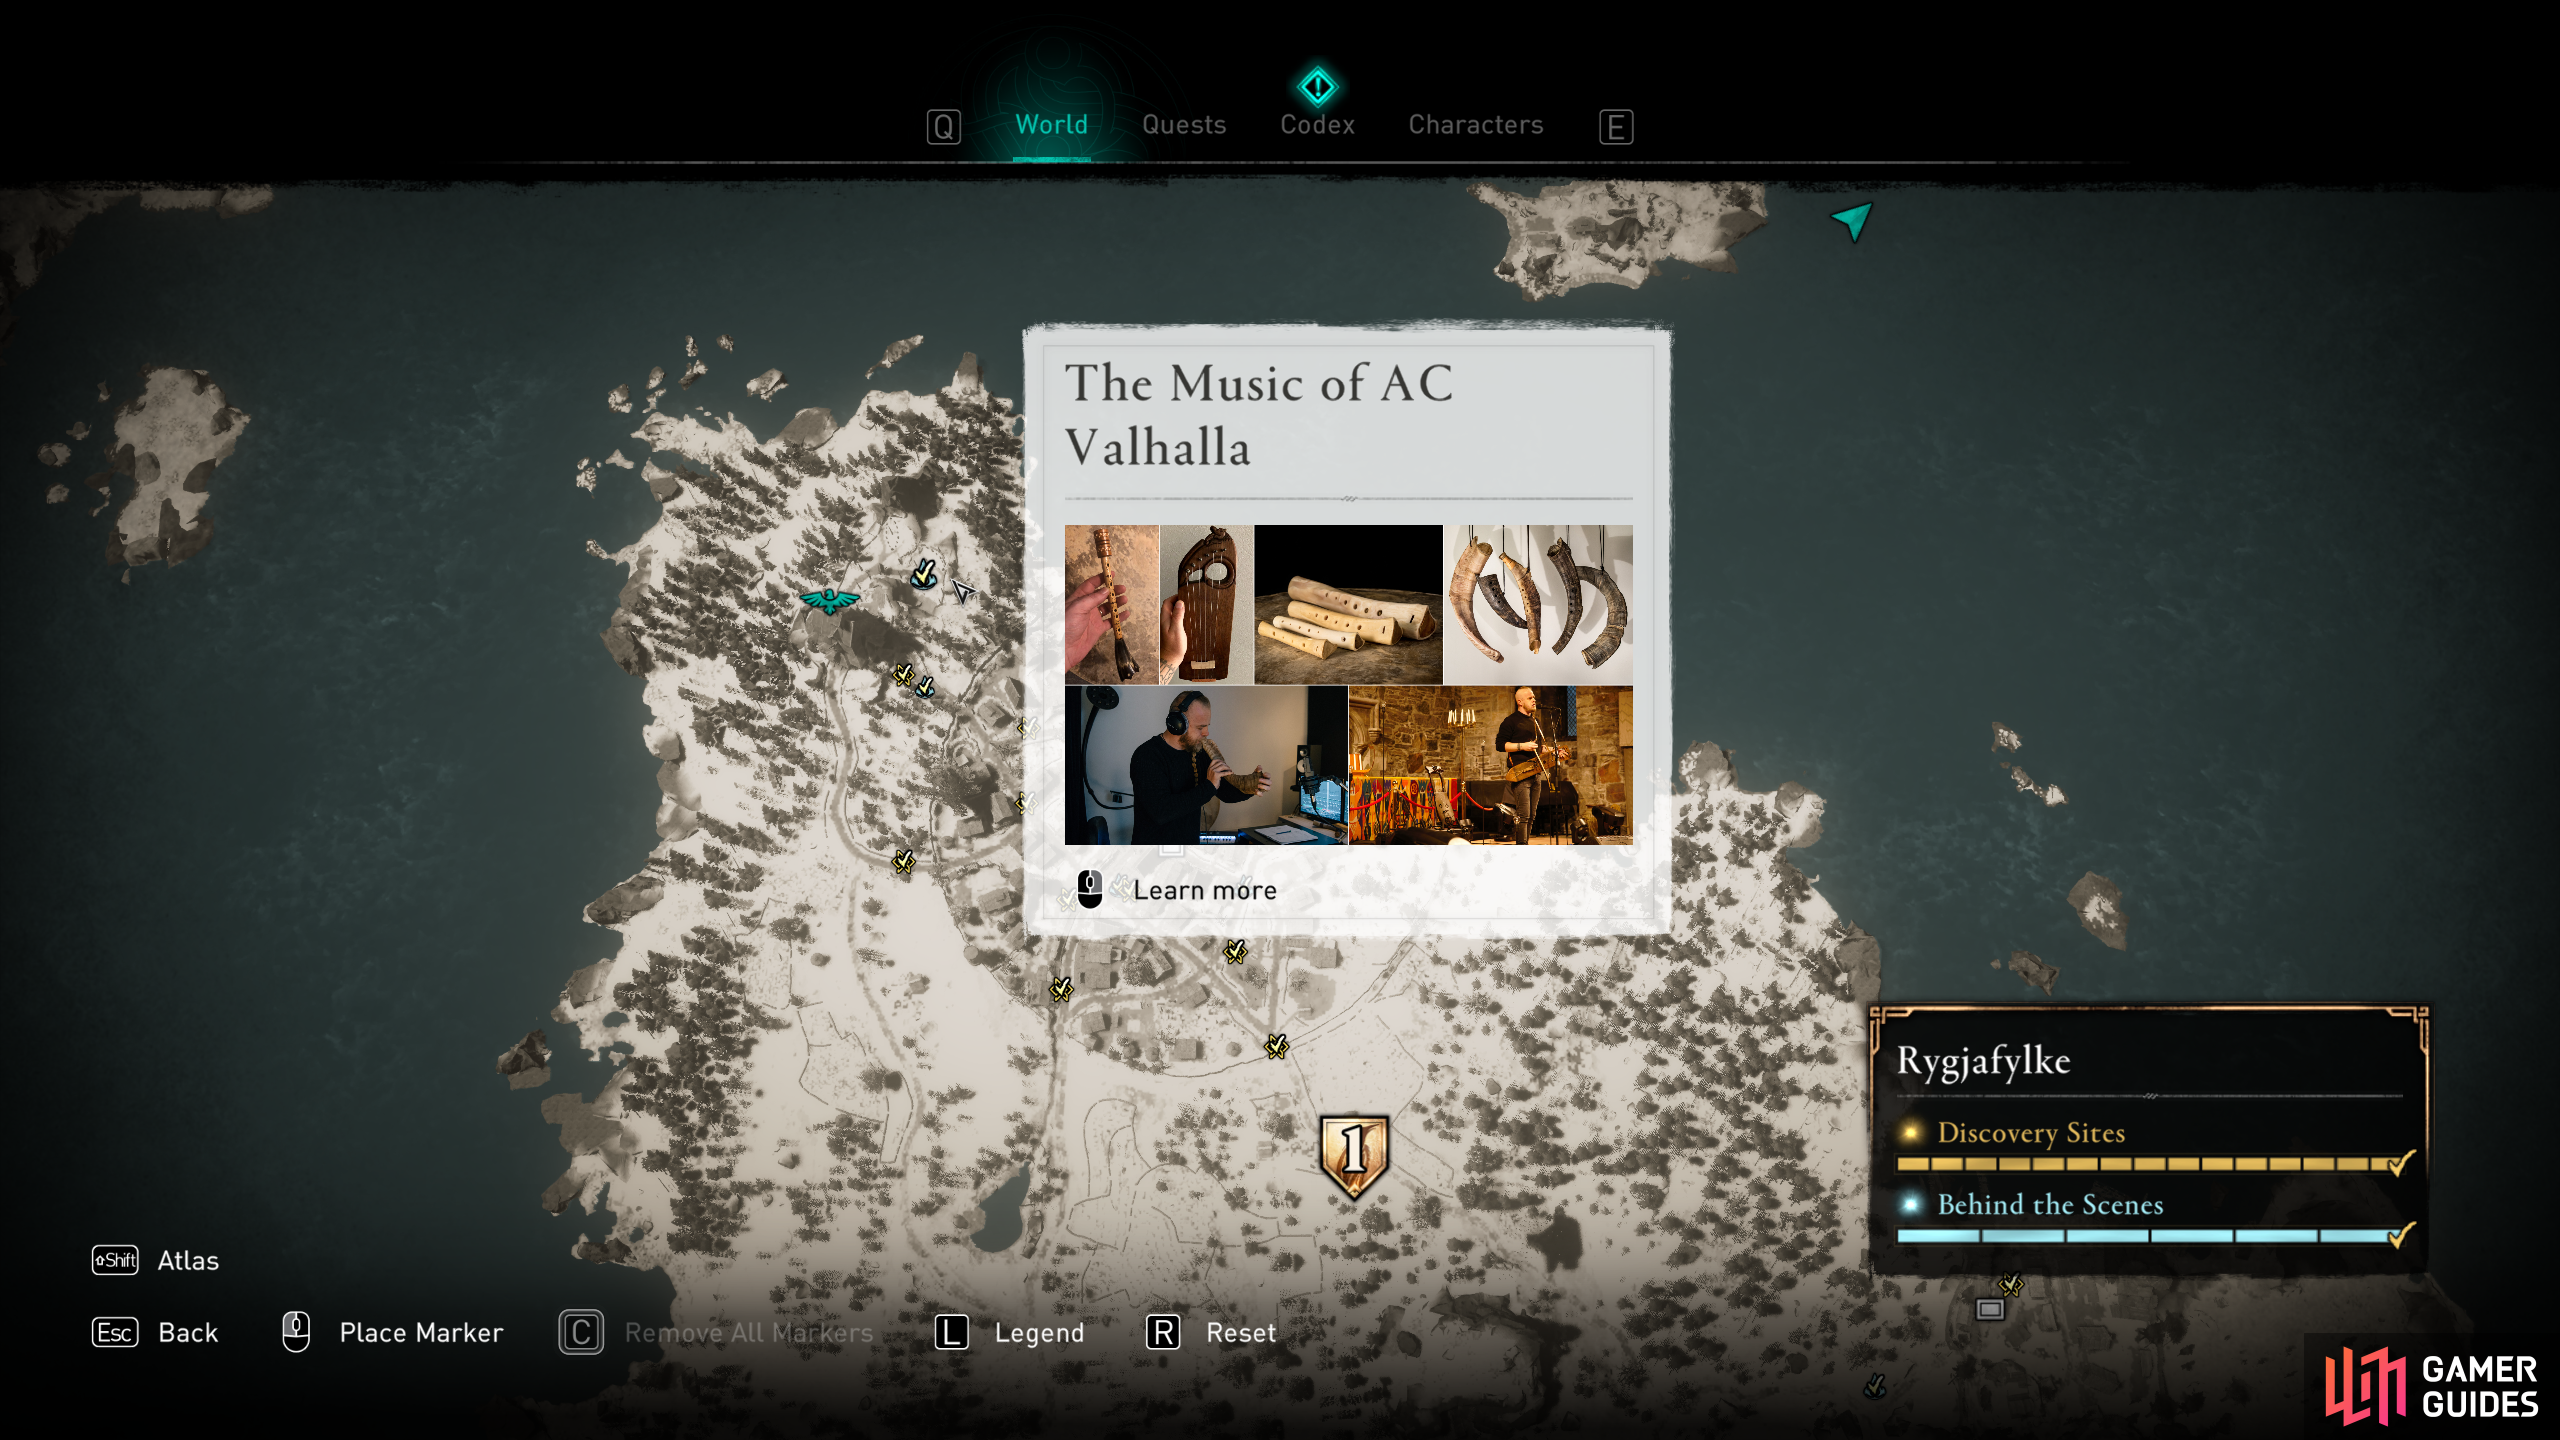 You'll find Behind the Scenes teal icons on the map.